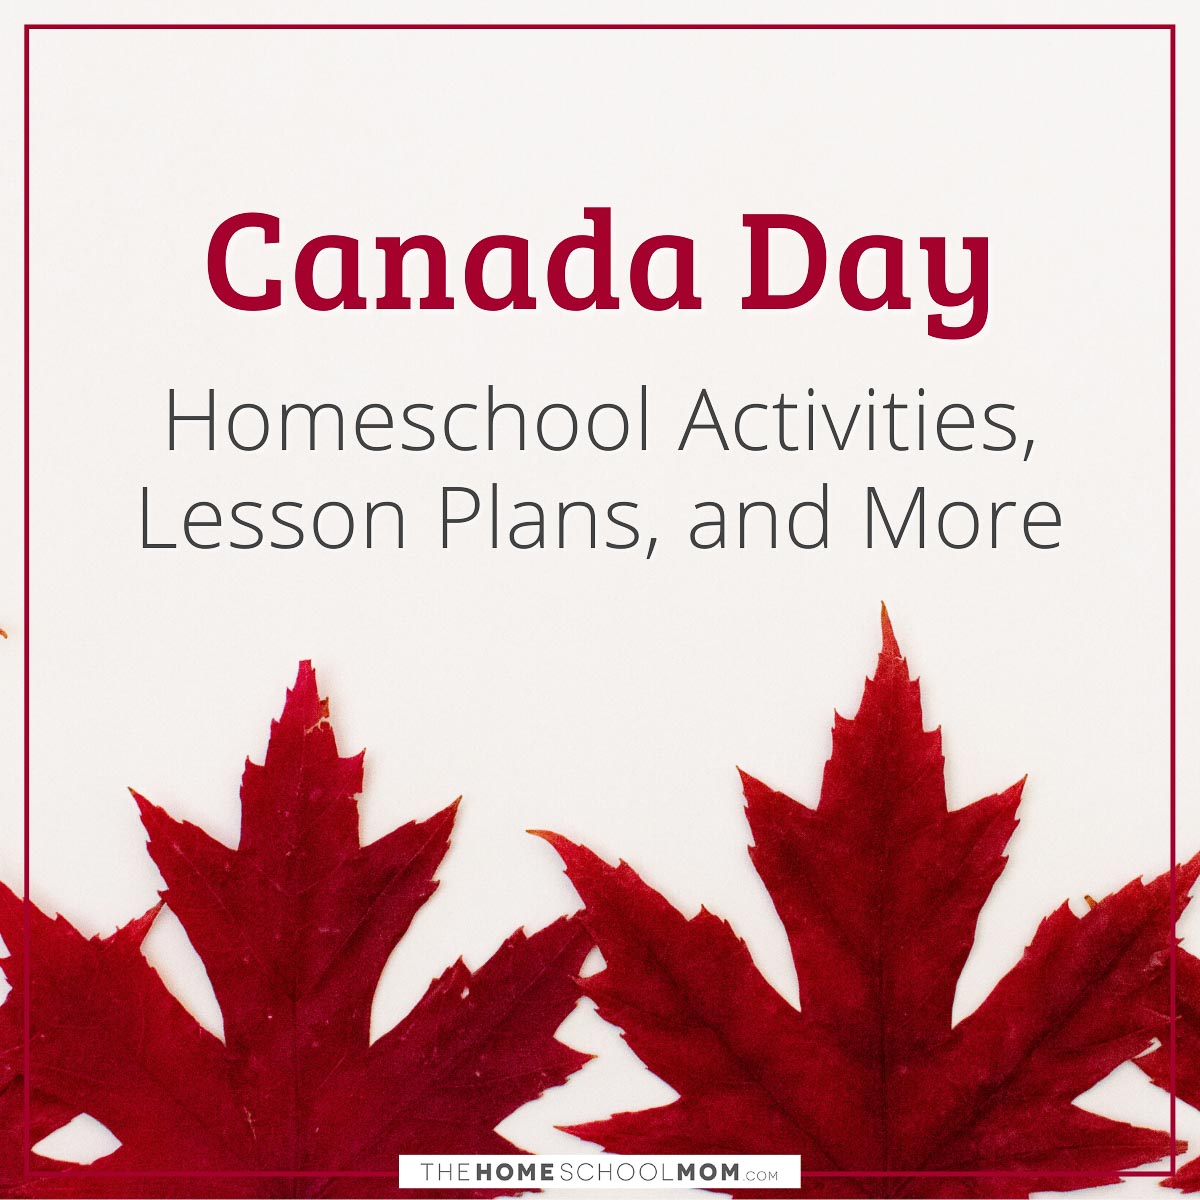 Canada Day Homeschool Activities, Lesson Plans, and More.